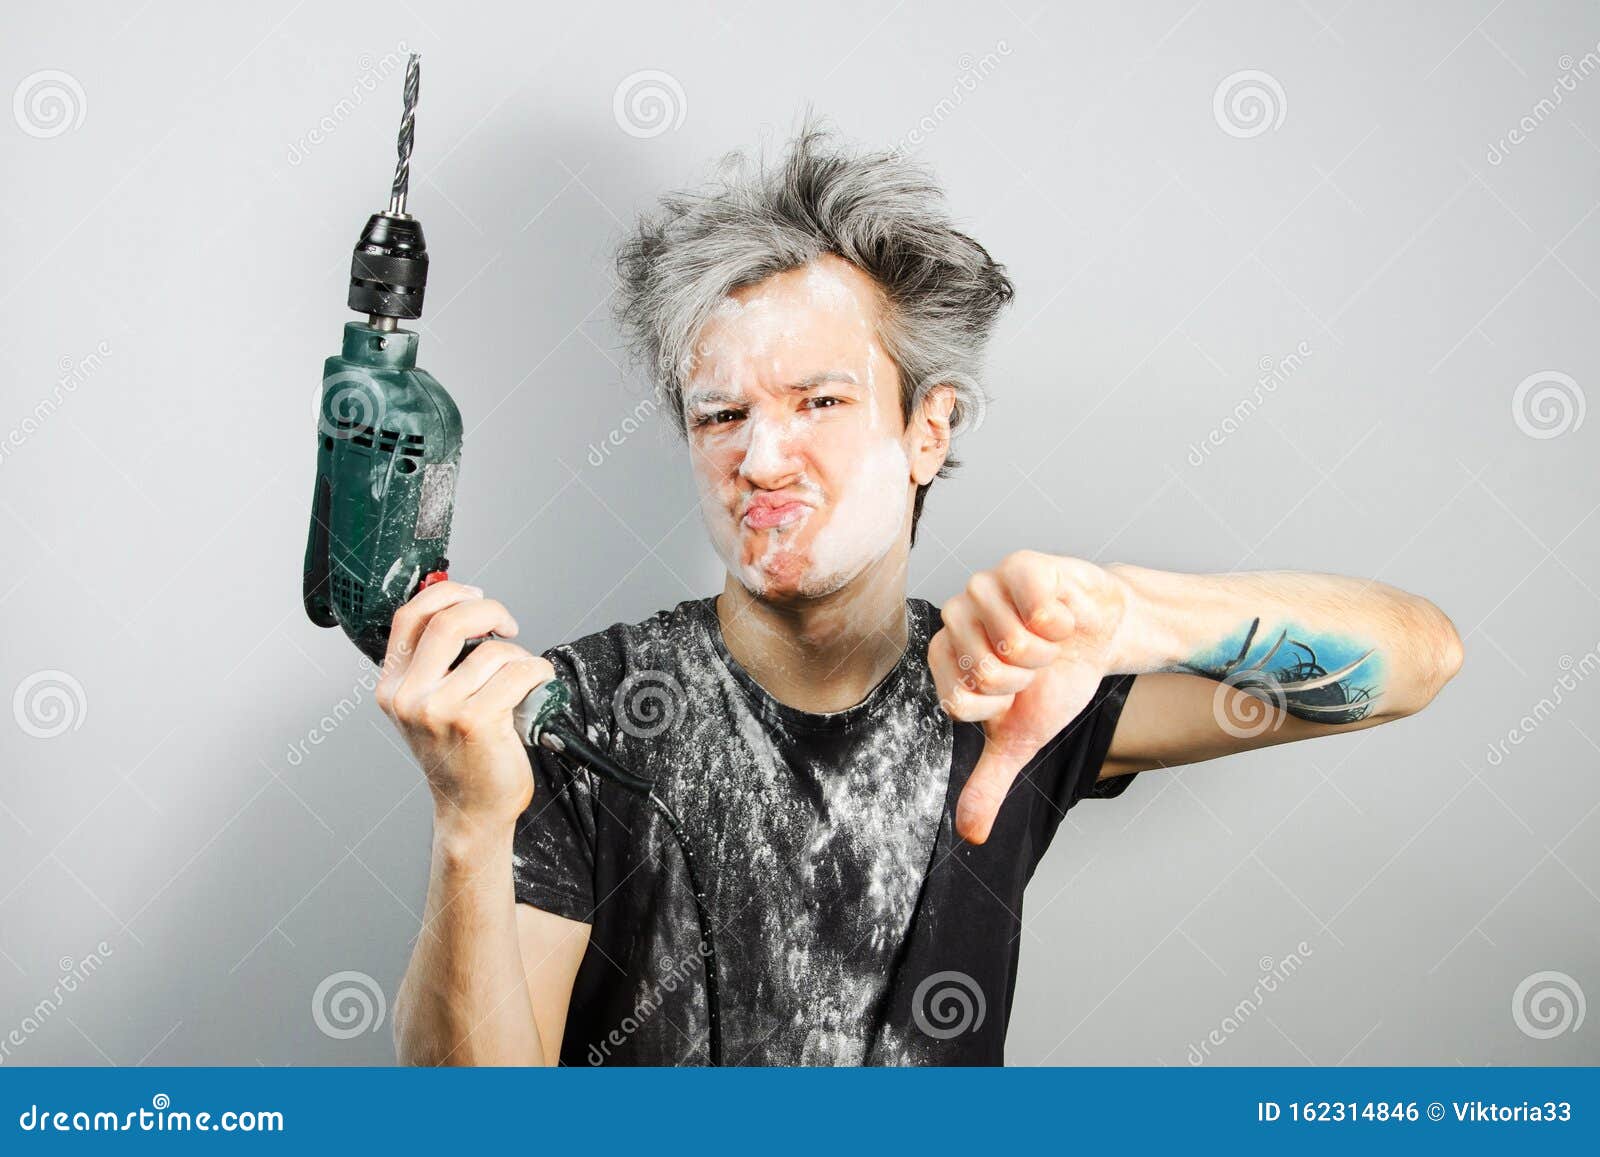 dirty young builder guy in plaster is hold a green drill perforator on gray background at home during repairs